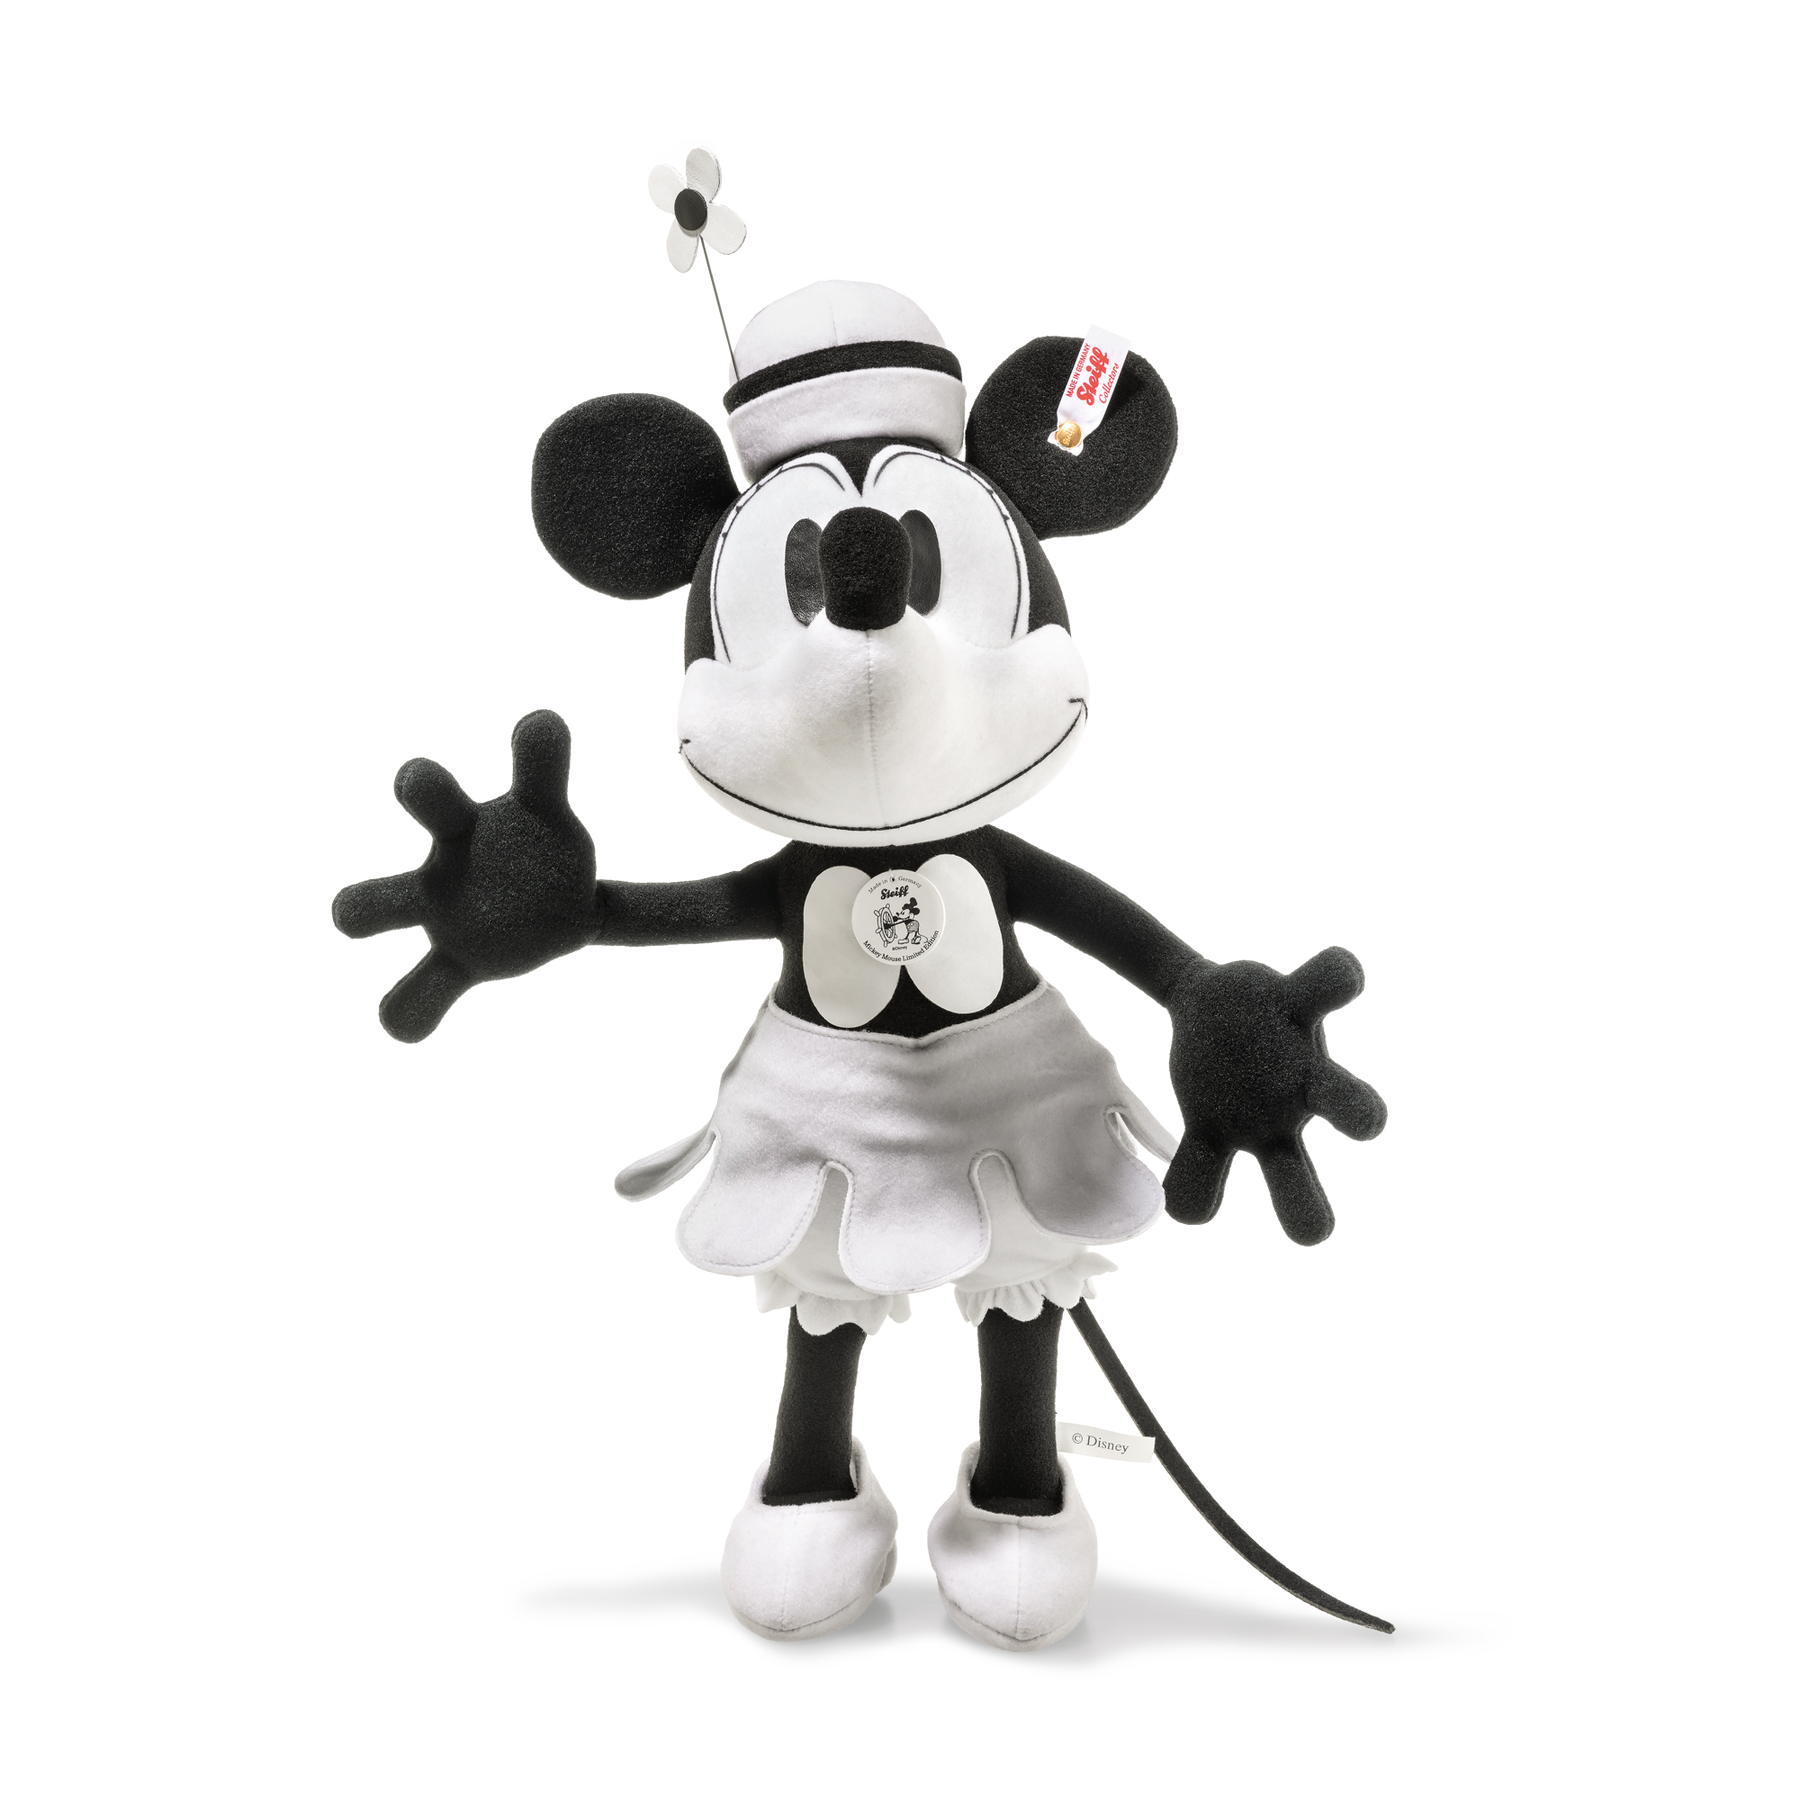 Disney Steamboat Willie – Minnie Mouse